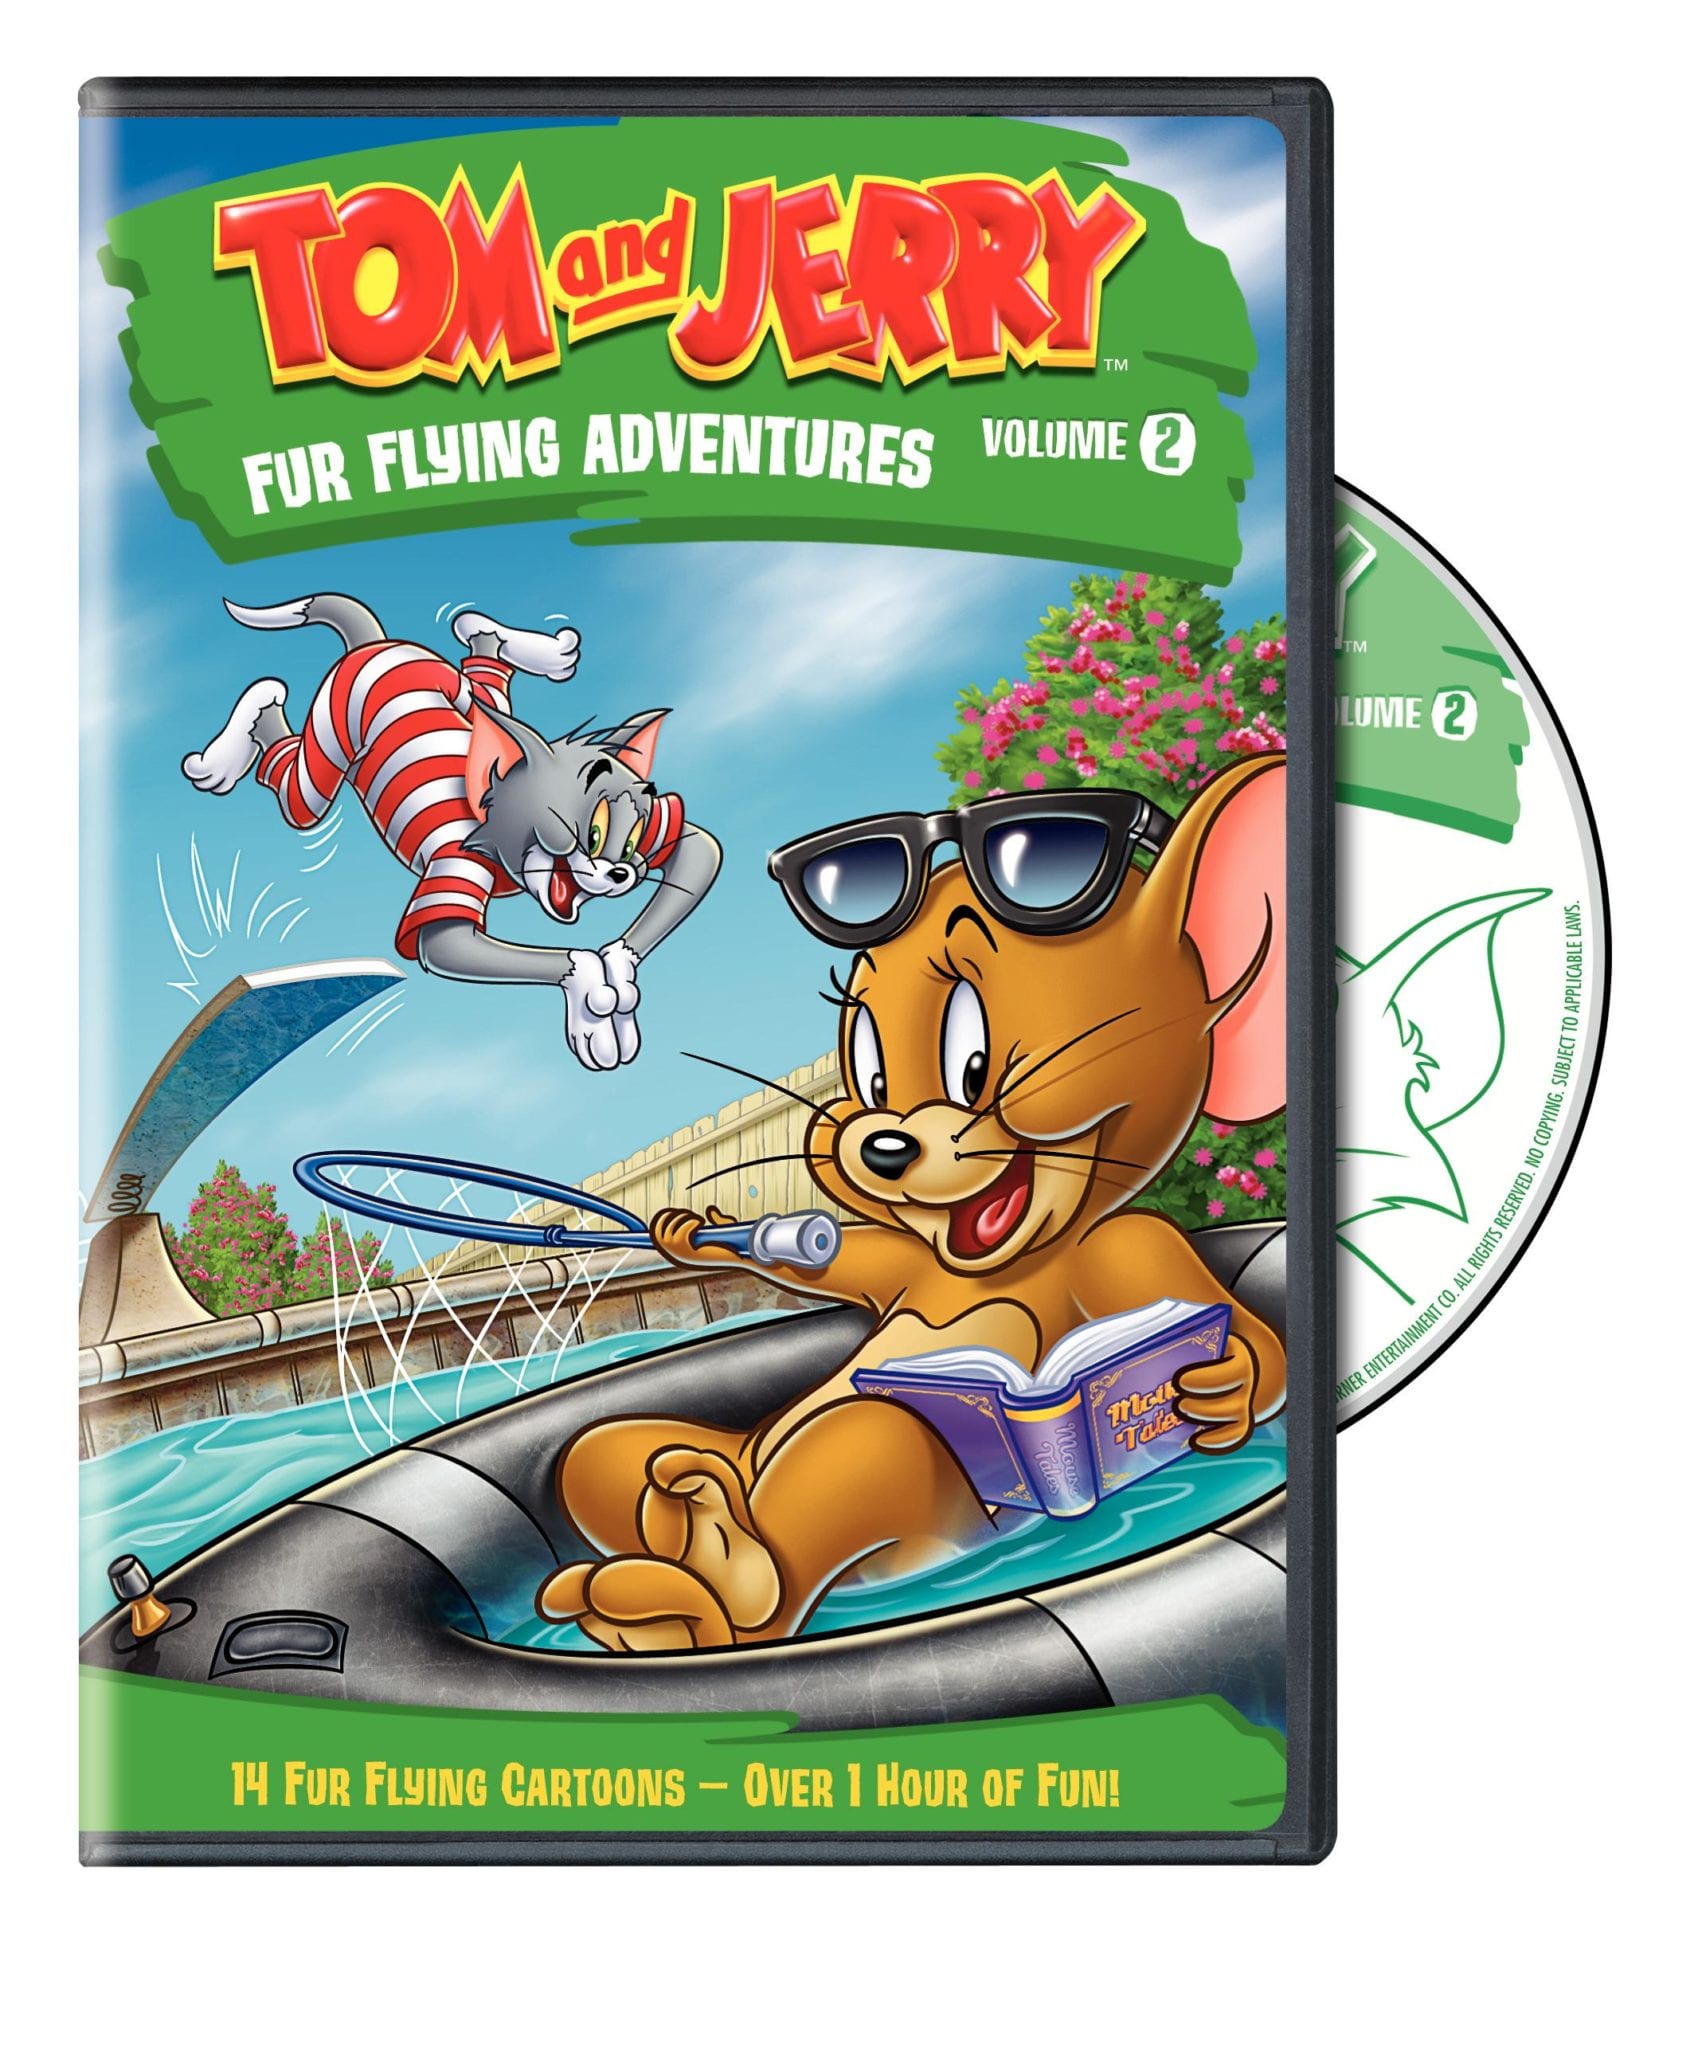 Tom and Jerry: Fur Flying Adventure Volume 2